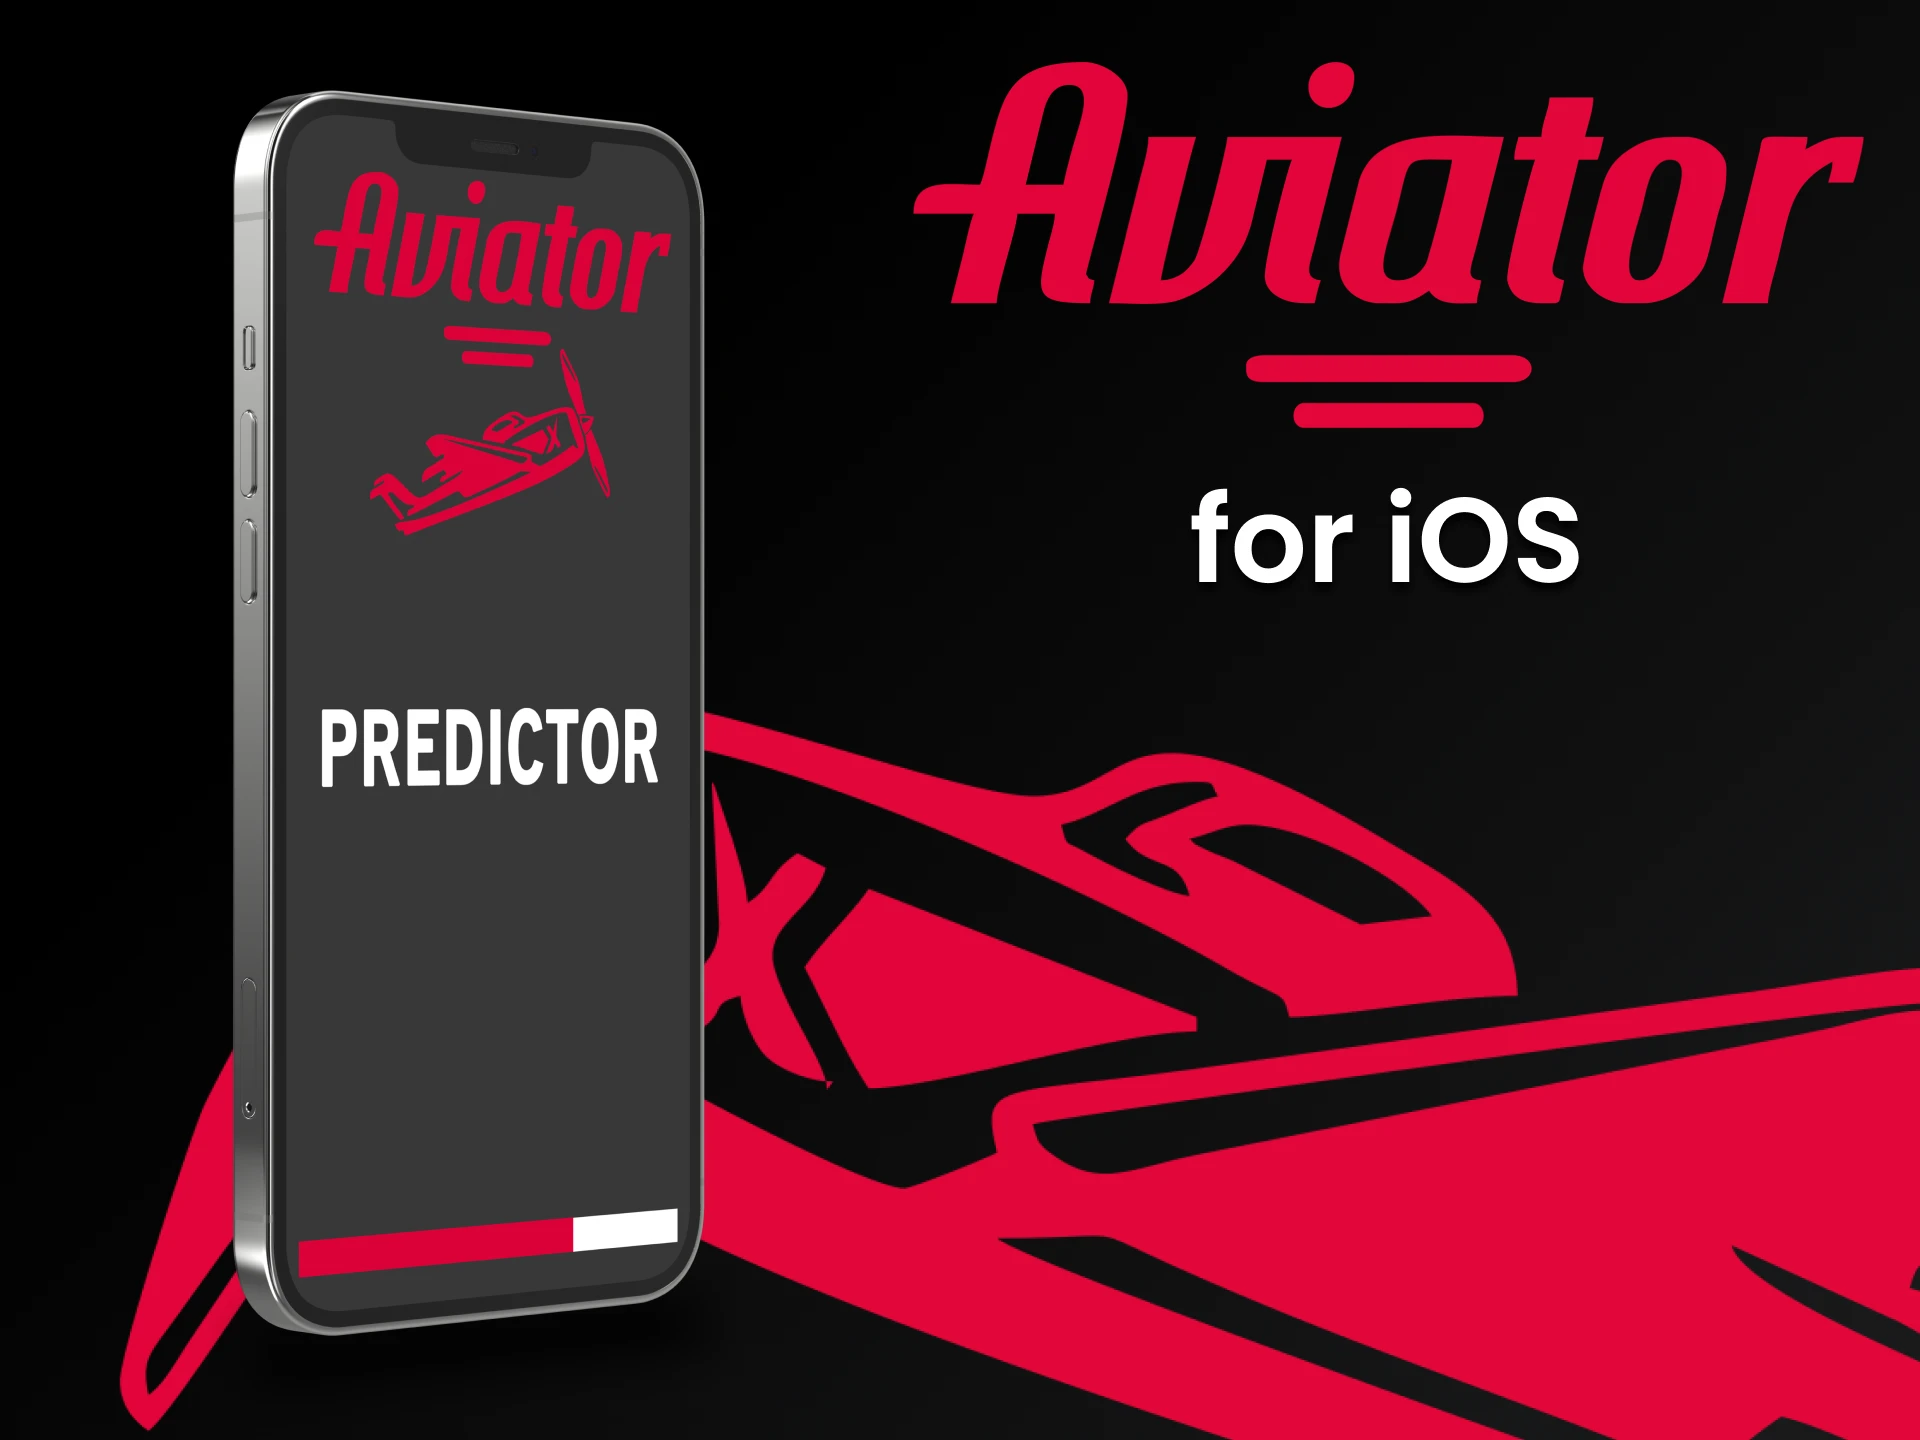 You can use software to play Aviator on an iOS device.